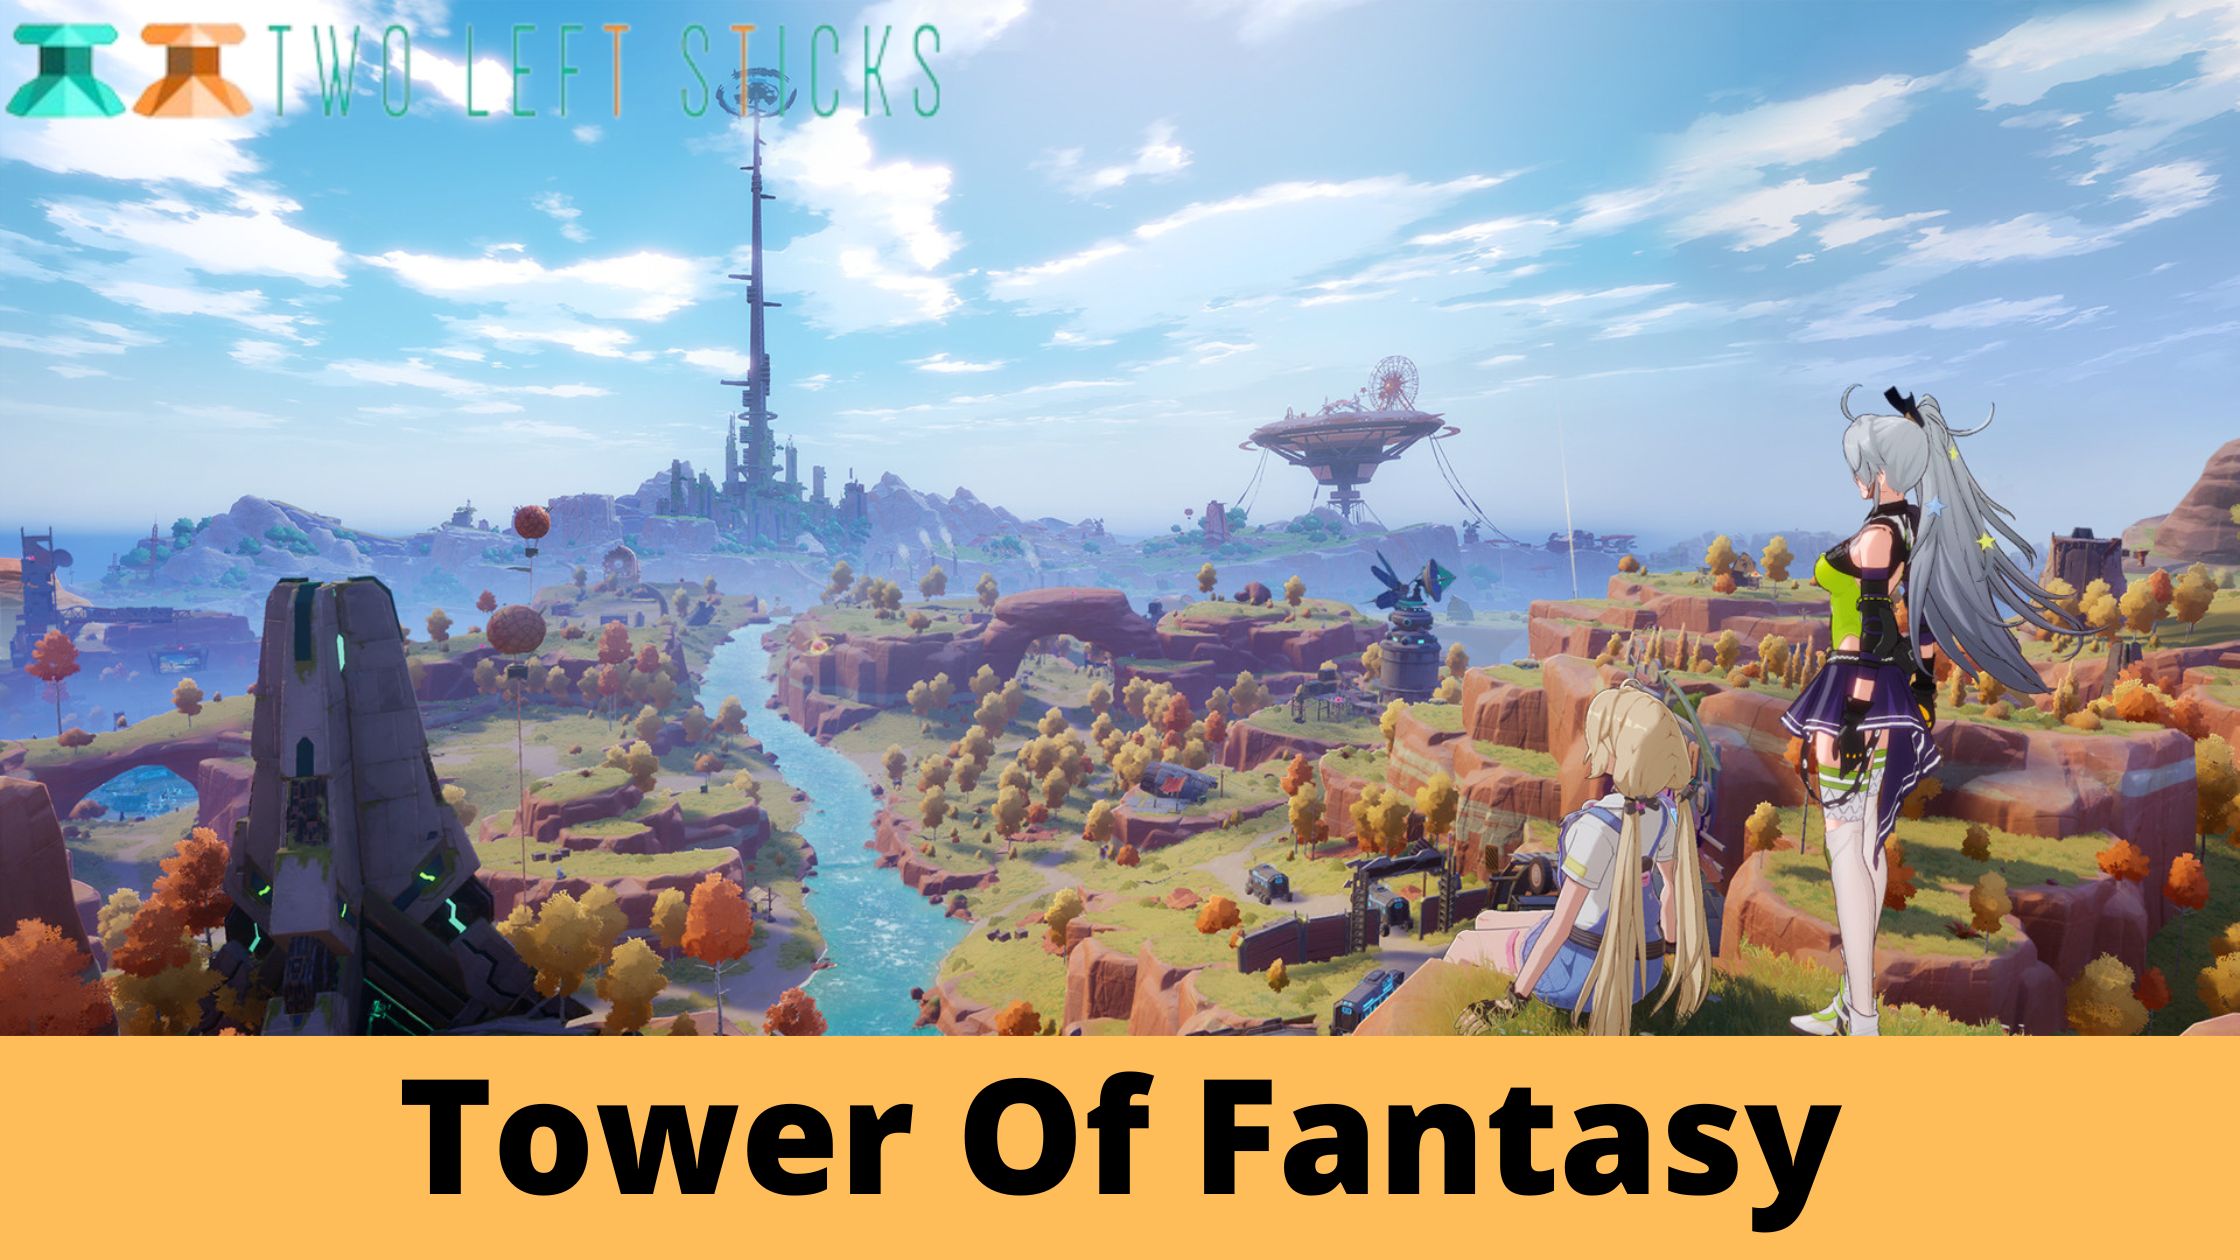 Tower Of Fantasy- In what ways is it possible to have too much Fantasy?